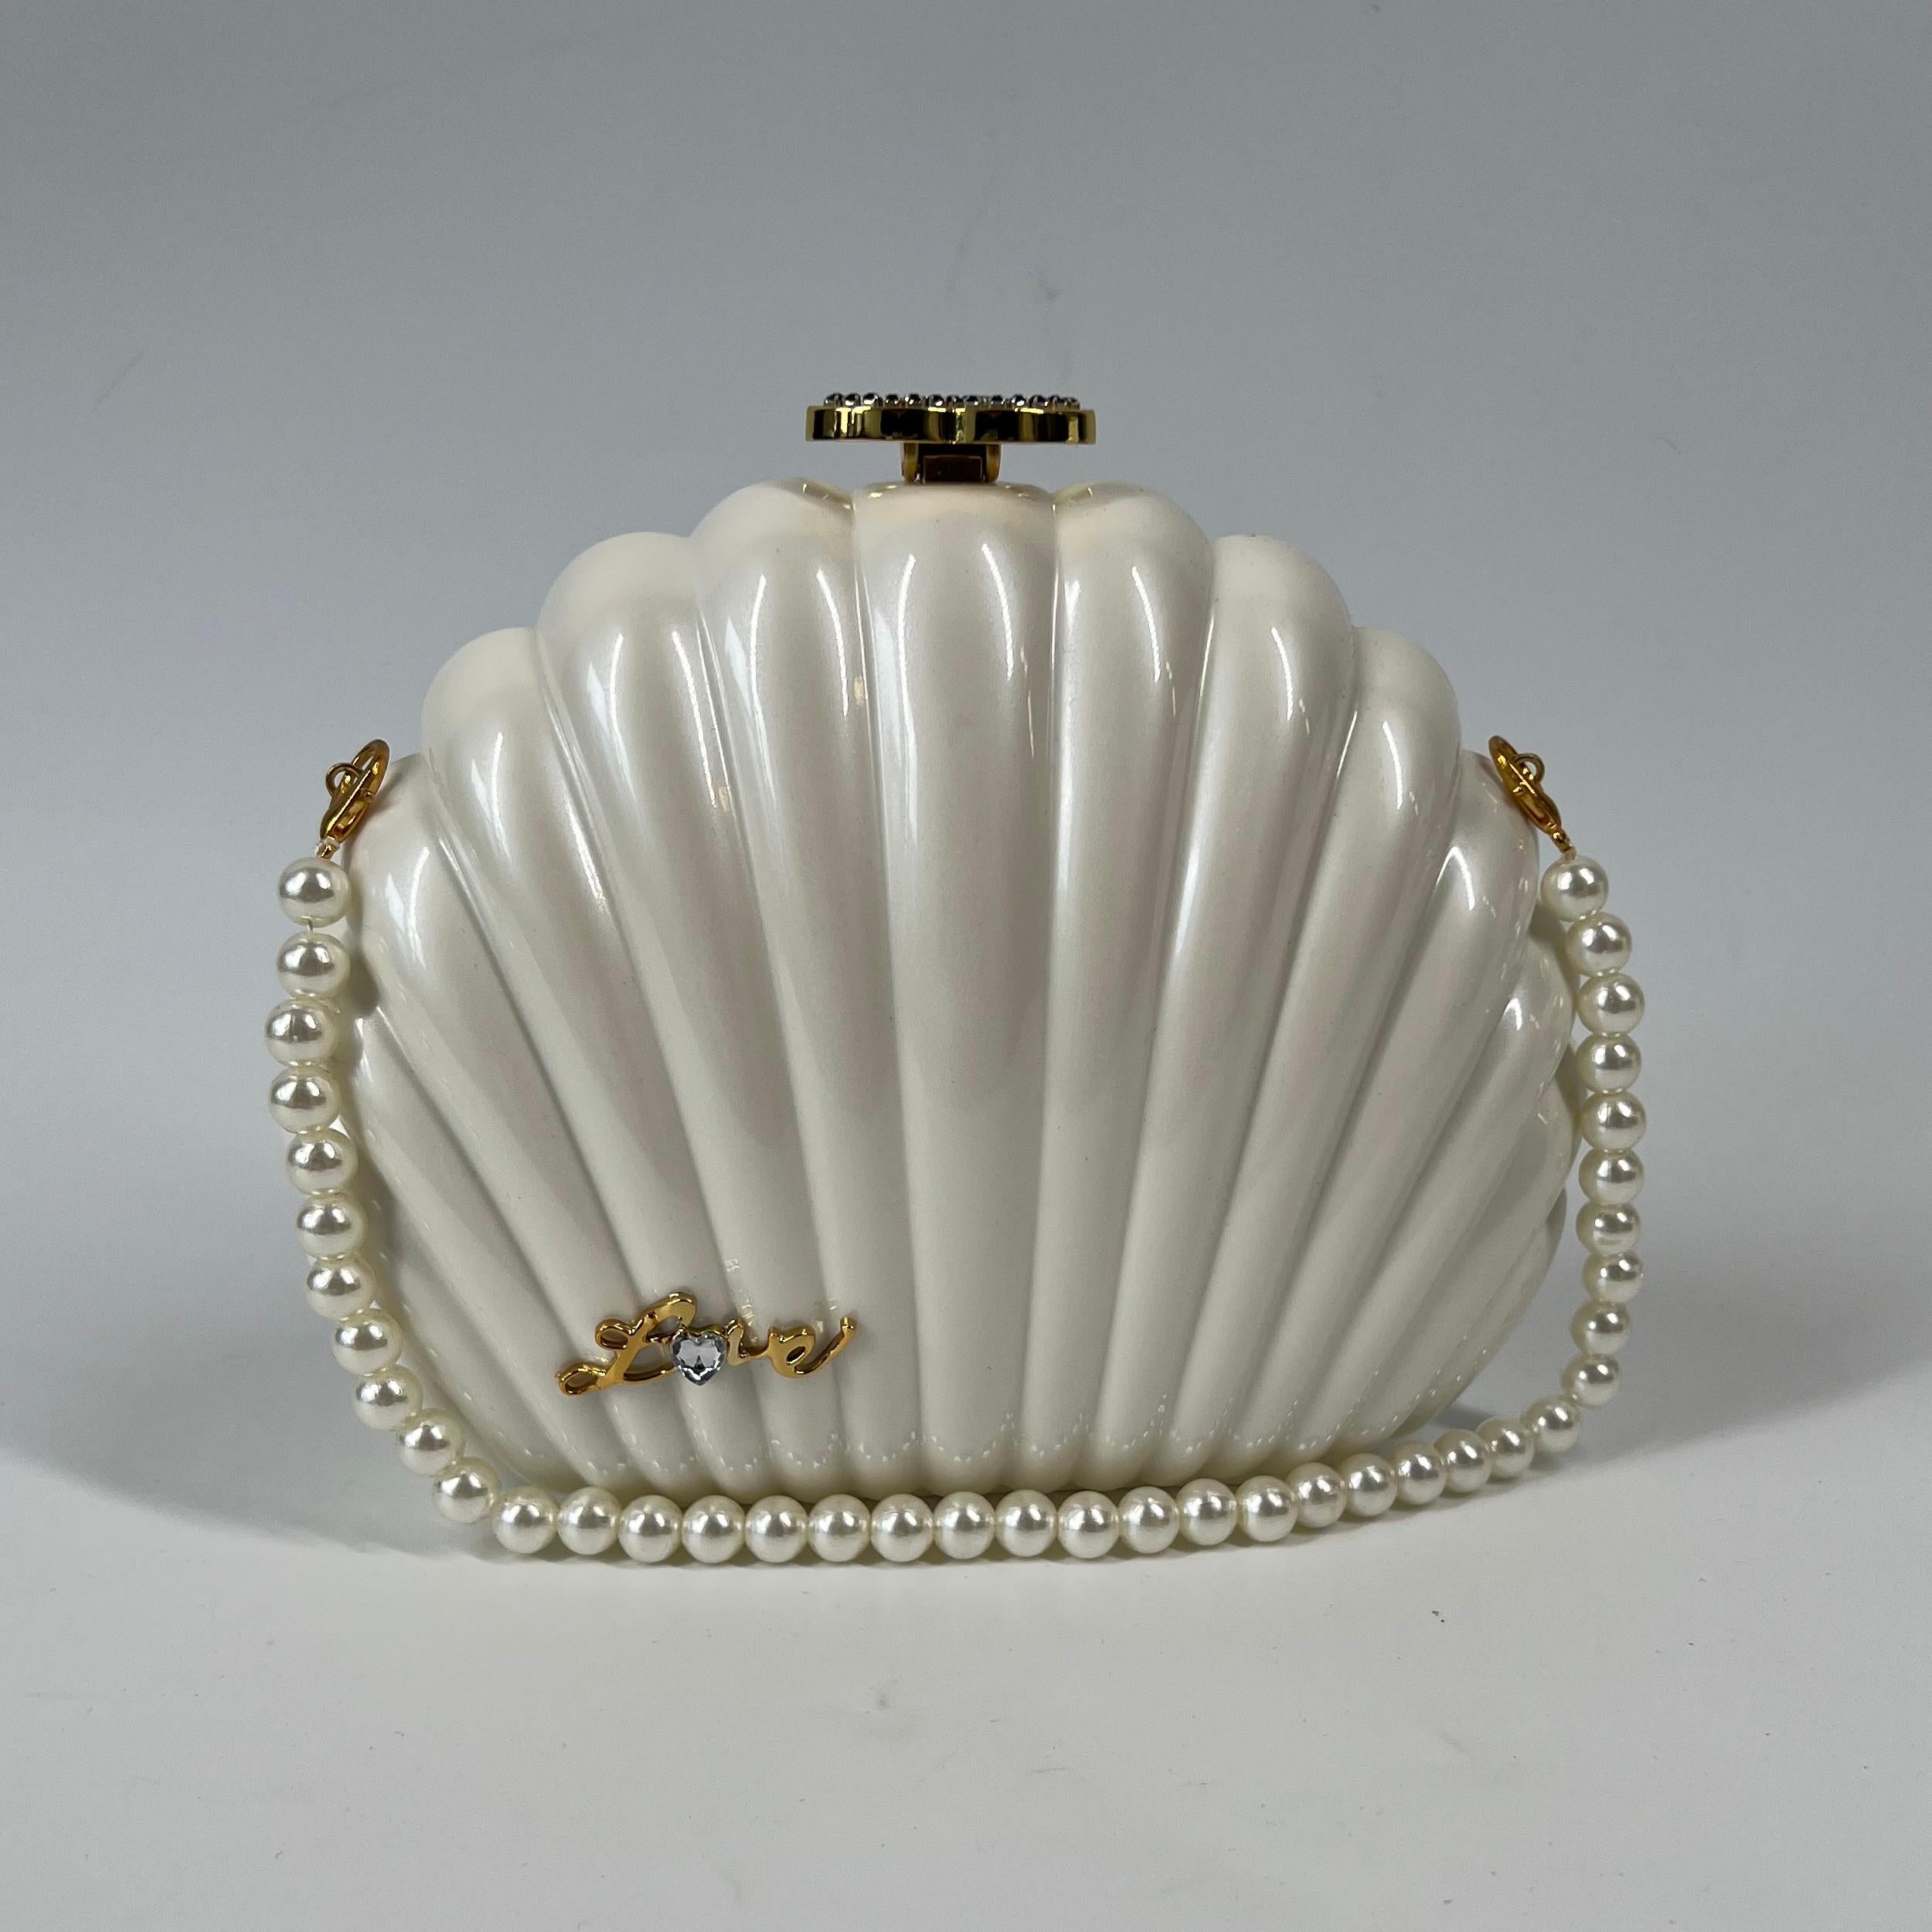 Collectible Chanel VIP gift with purchase bag. The bag takes the form of a sea shell.

COLOR: White
MATERIAL: PVC, strass CC, leather/chain strap
ITEM CODE: Gifted item with no hologram.
MEASURES: 6.5” x 9”
DROP: 21” (leather and chain) & 7” (faux